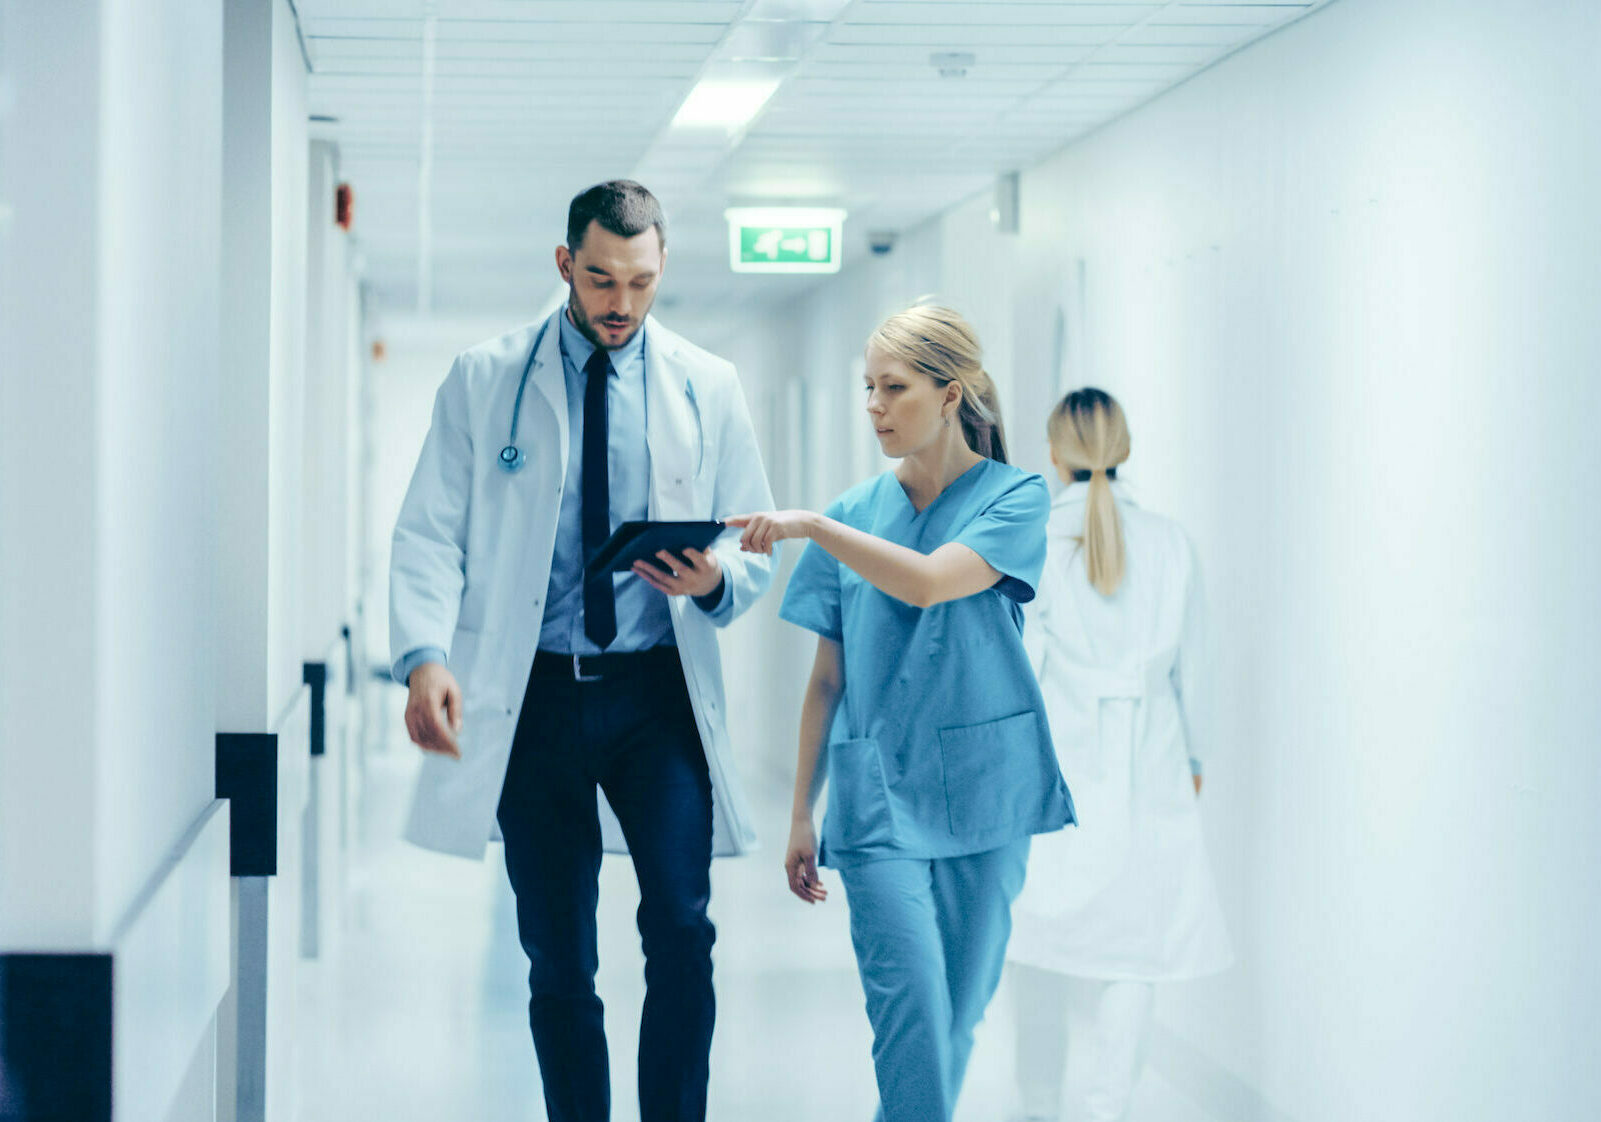 Artificial intelligence in hospitals: the state of art